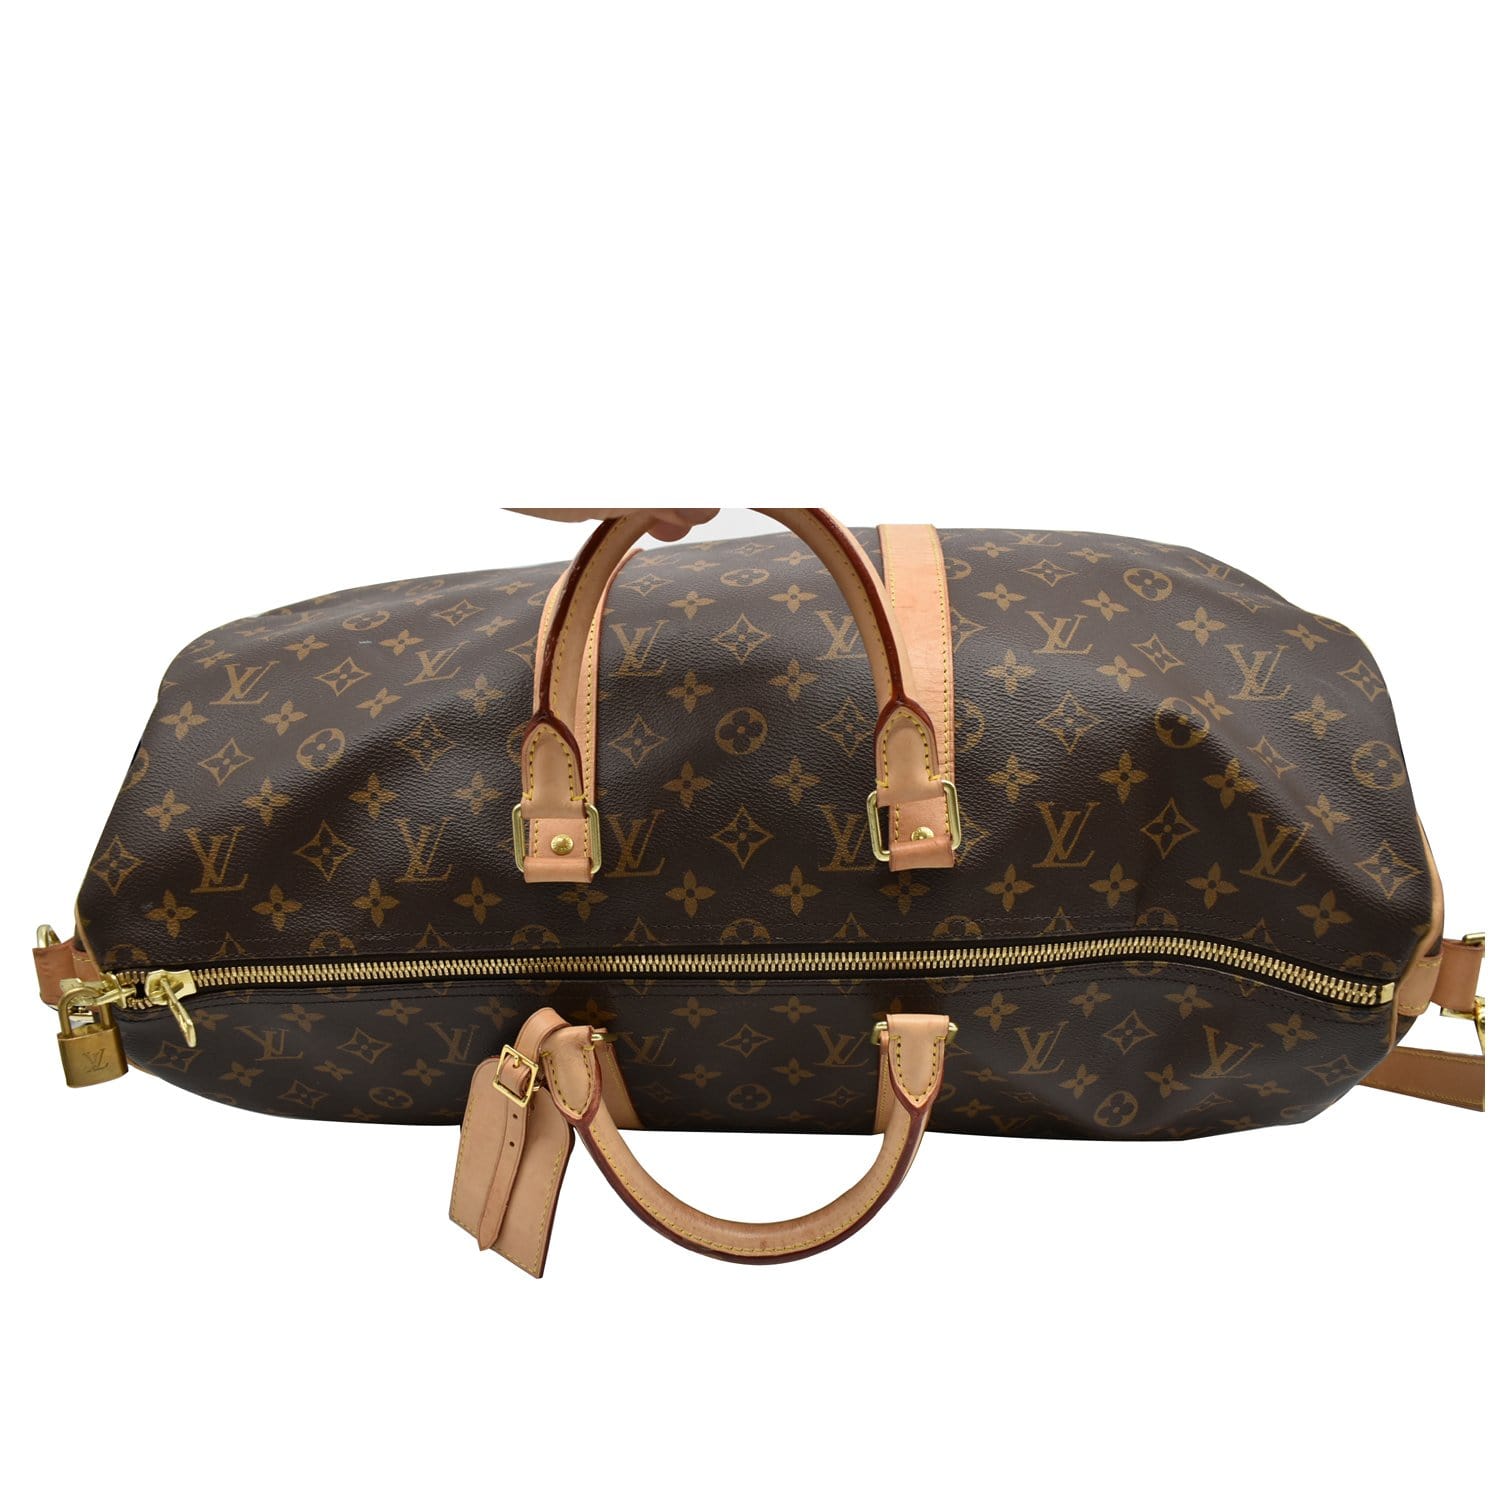 100% Authentic! LOUIS-VUITTON Keepall 50 bandouliere DUFFEL TRAVEL